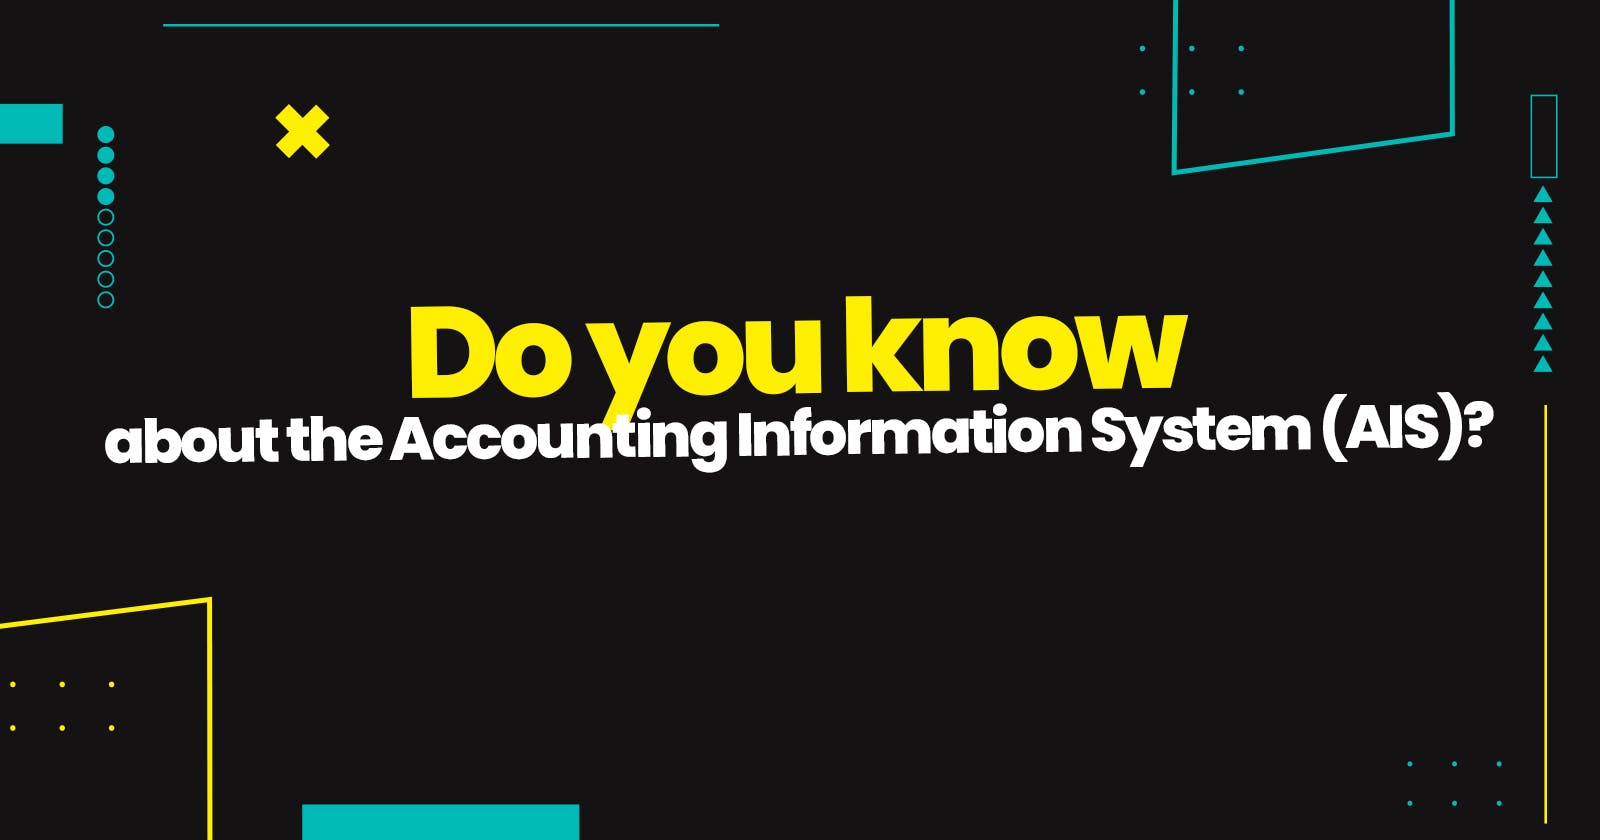 Do you know about the Accounting Information System (AIS)?